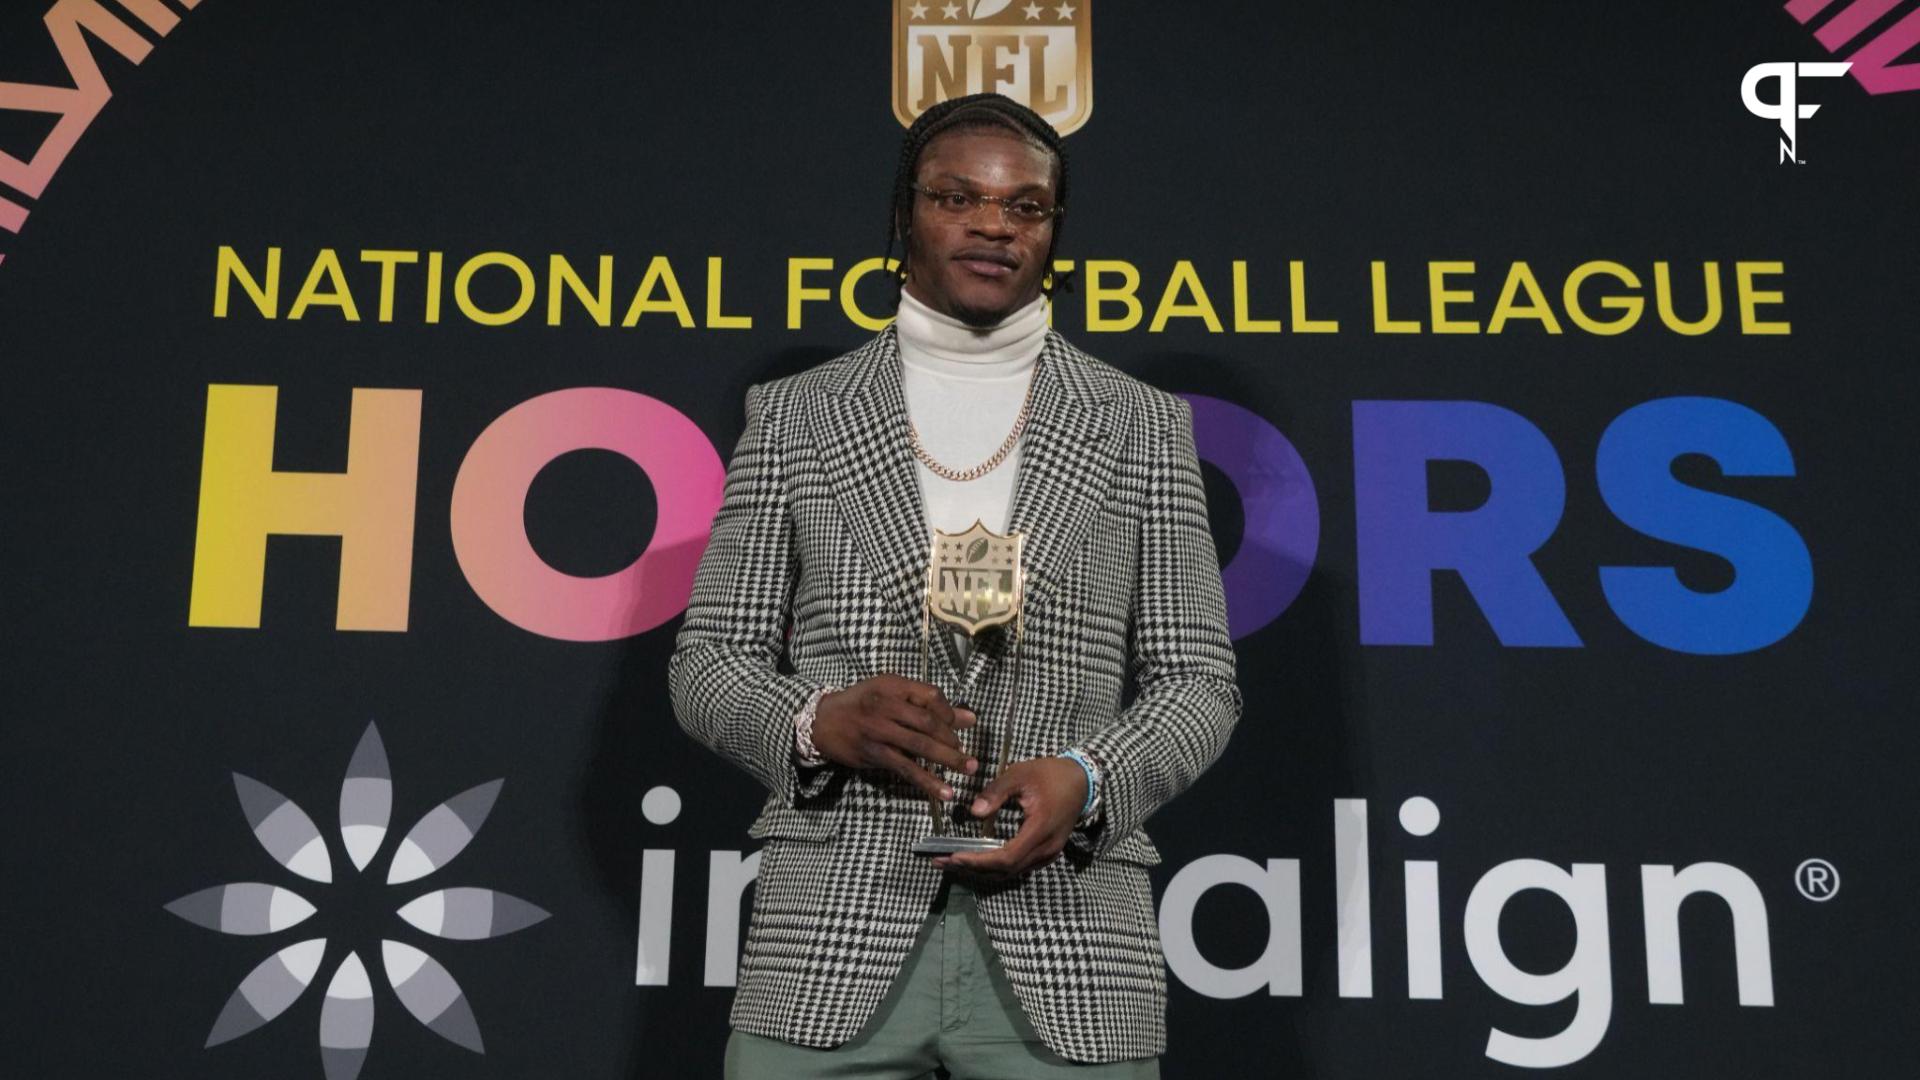 What Surprising Thing Did Lamar Jackson Say During His MVP Acceptance Speech?